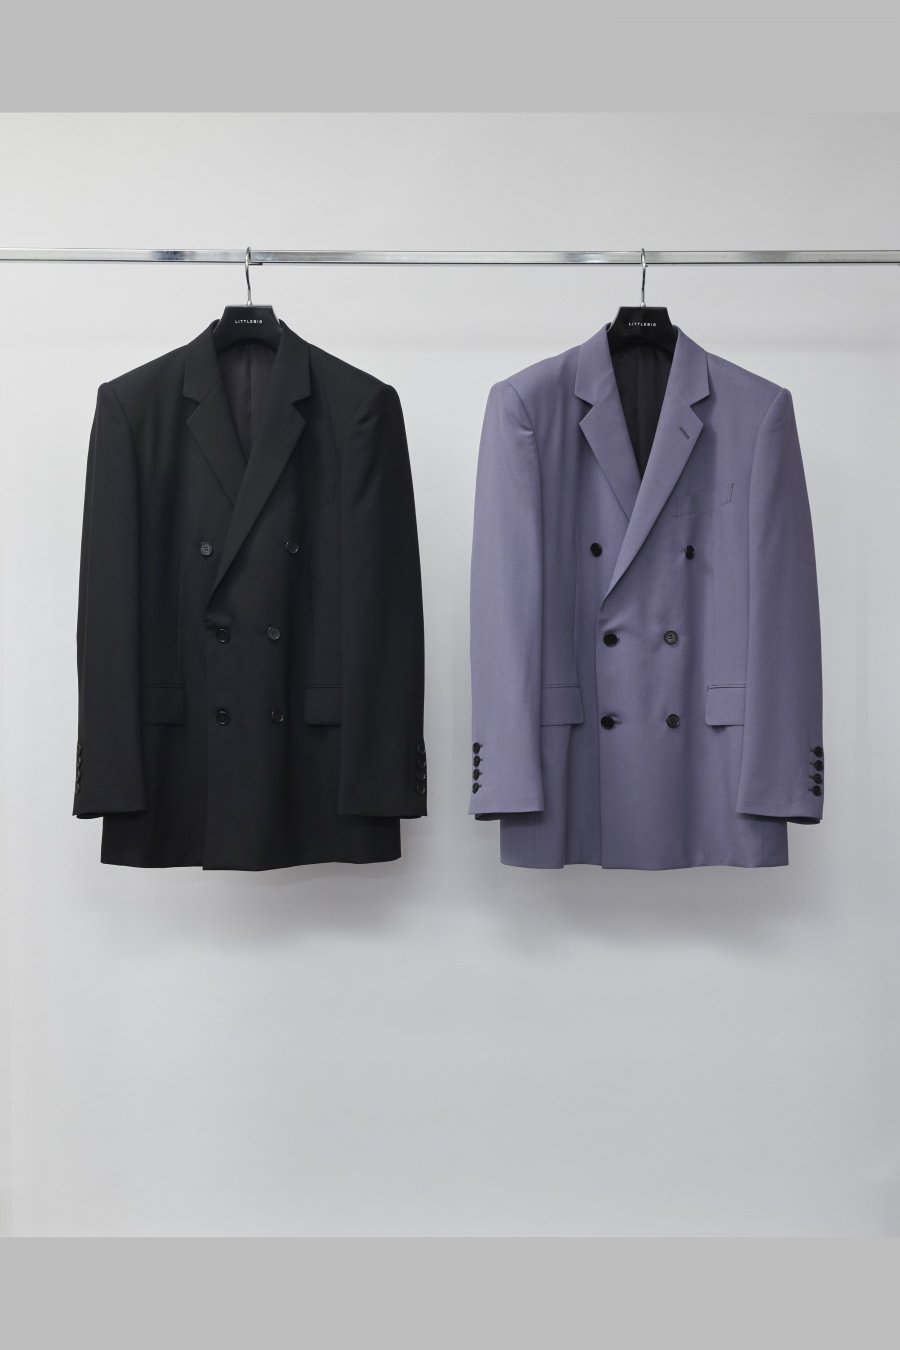 LITTLEBIG（リトルビッグ）の22ss 6B Double Breasted Jacket Purple